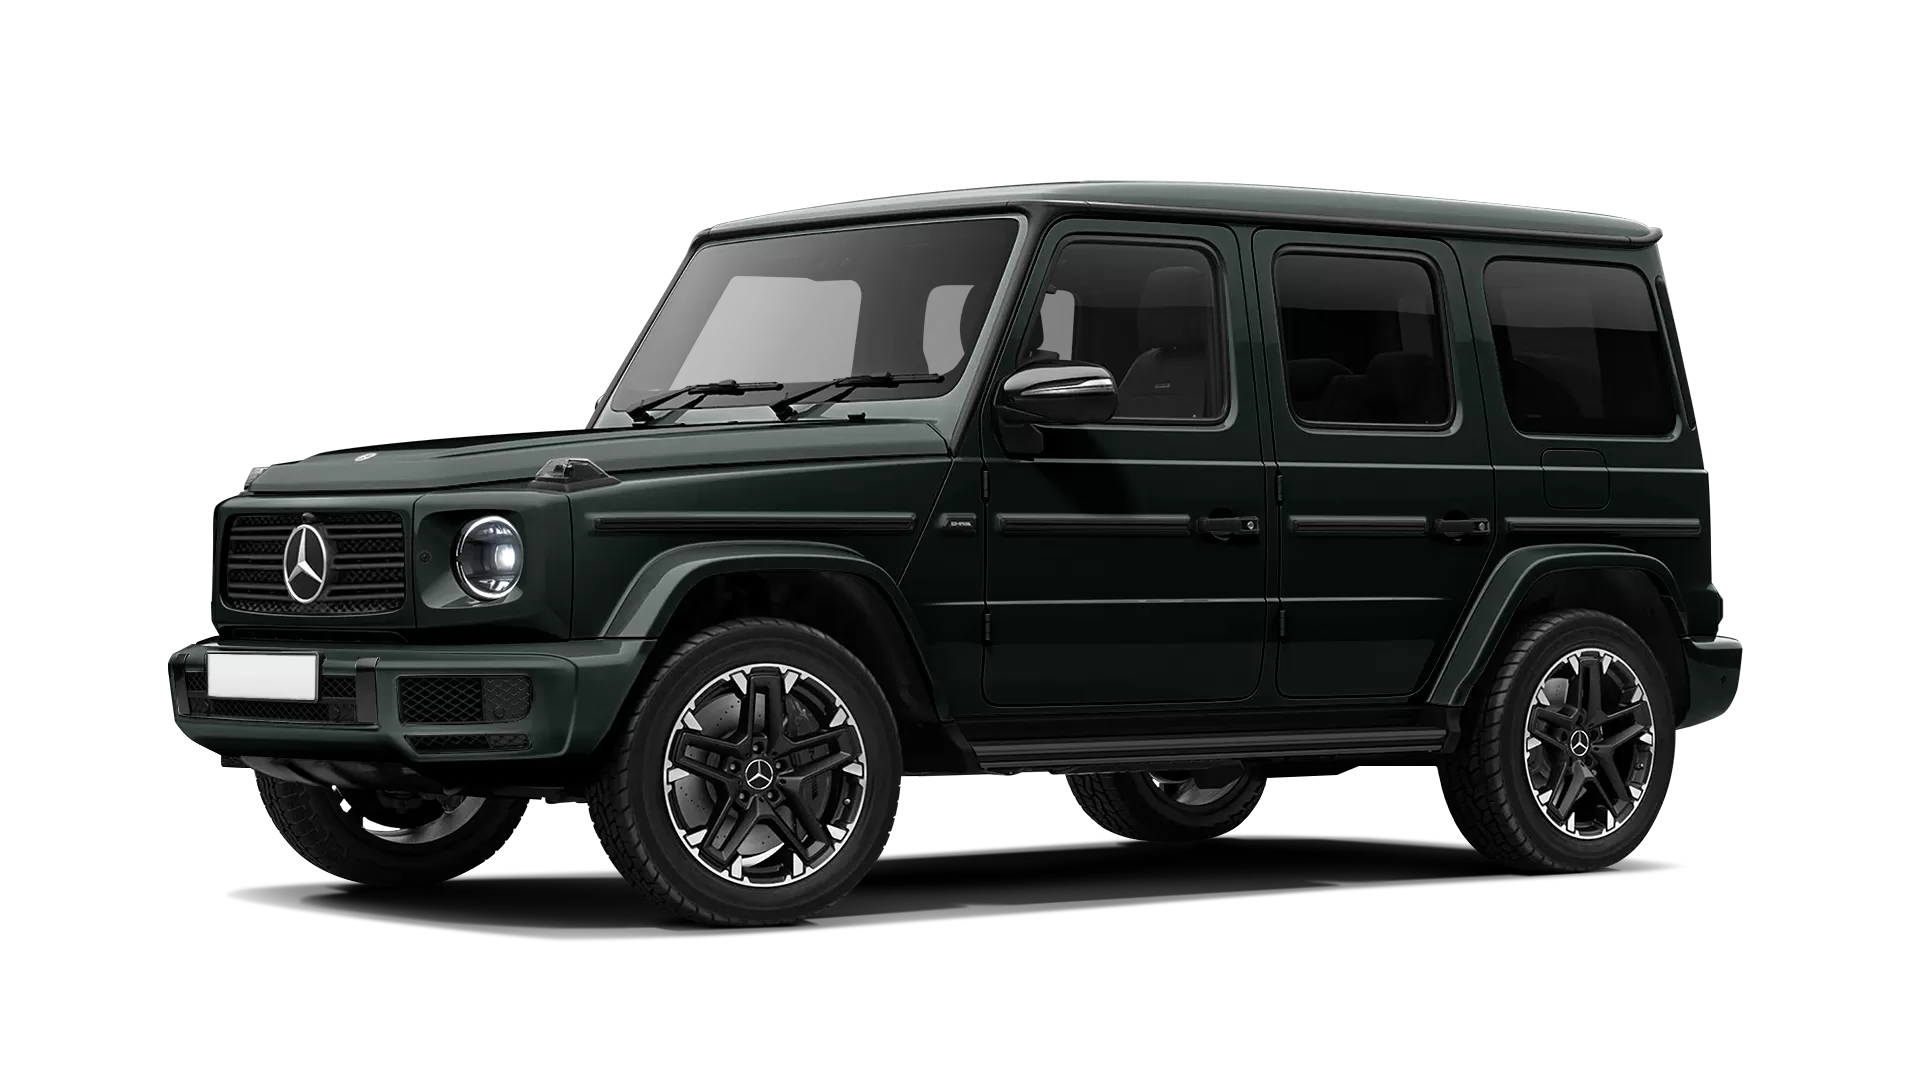 Mercedes G class W463 stock front view in Dark Green color